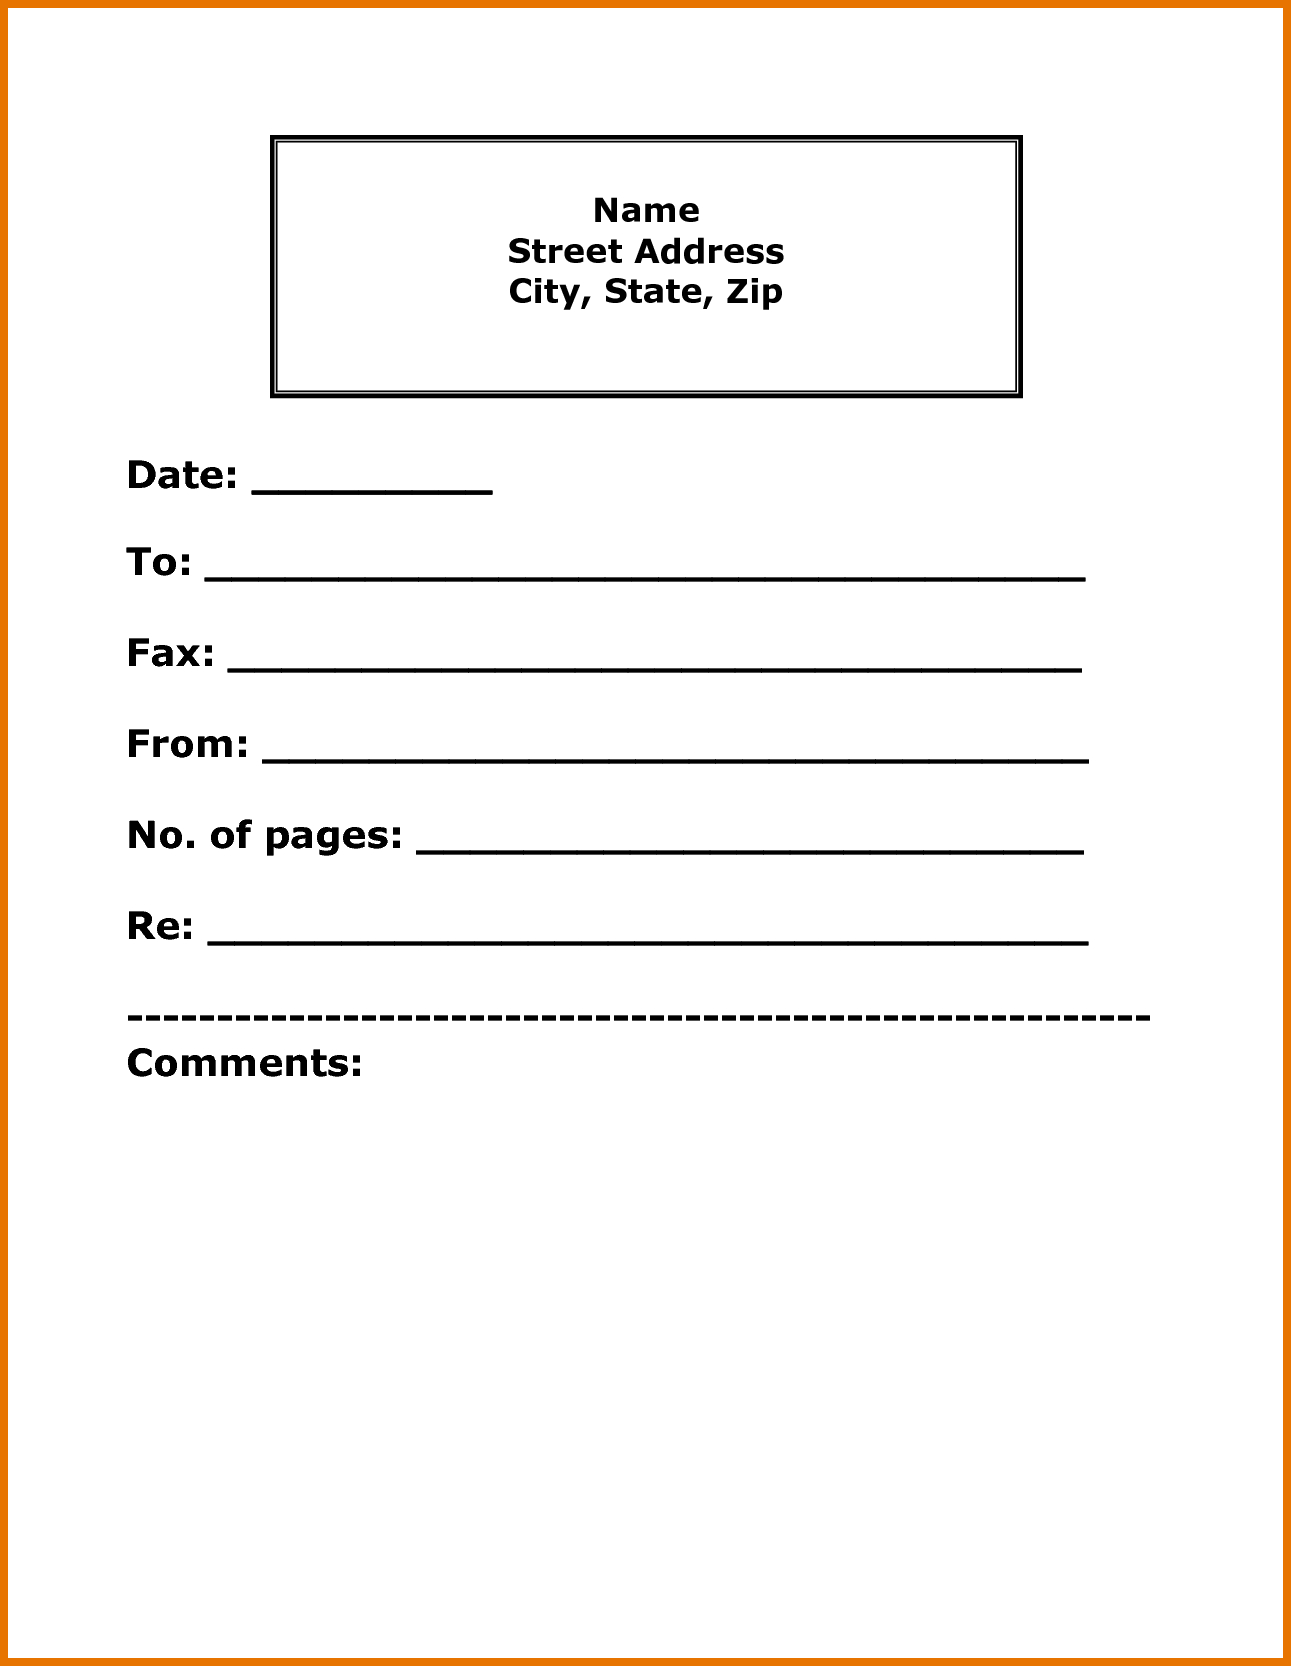 Cretech Make Fax Cover Sheet 768 | Rosewoodtavern Intended For Fax Cover Sheet Template Word 2010